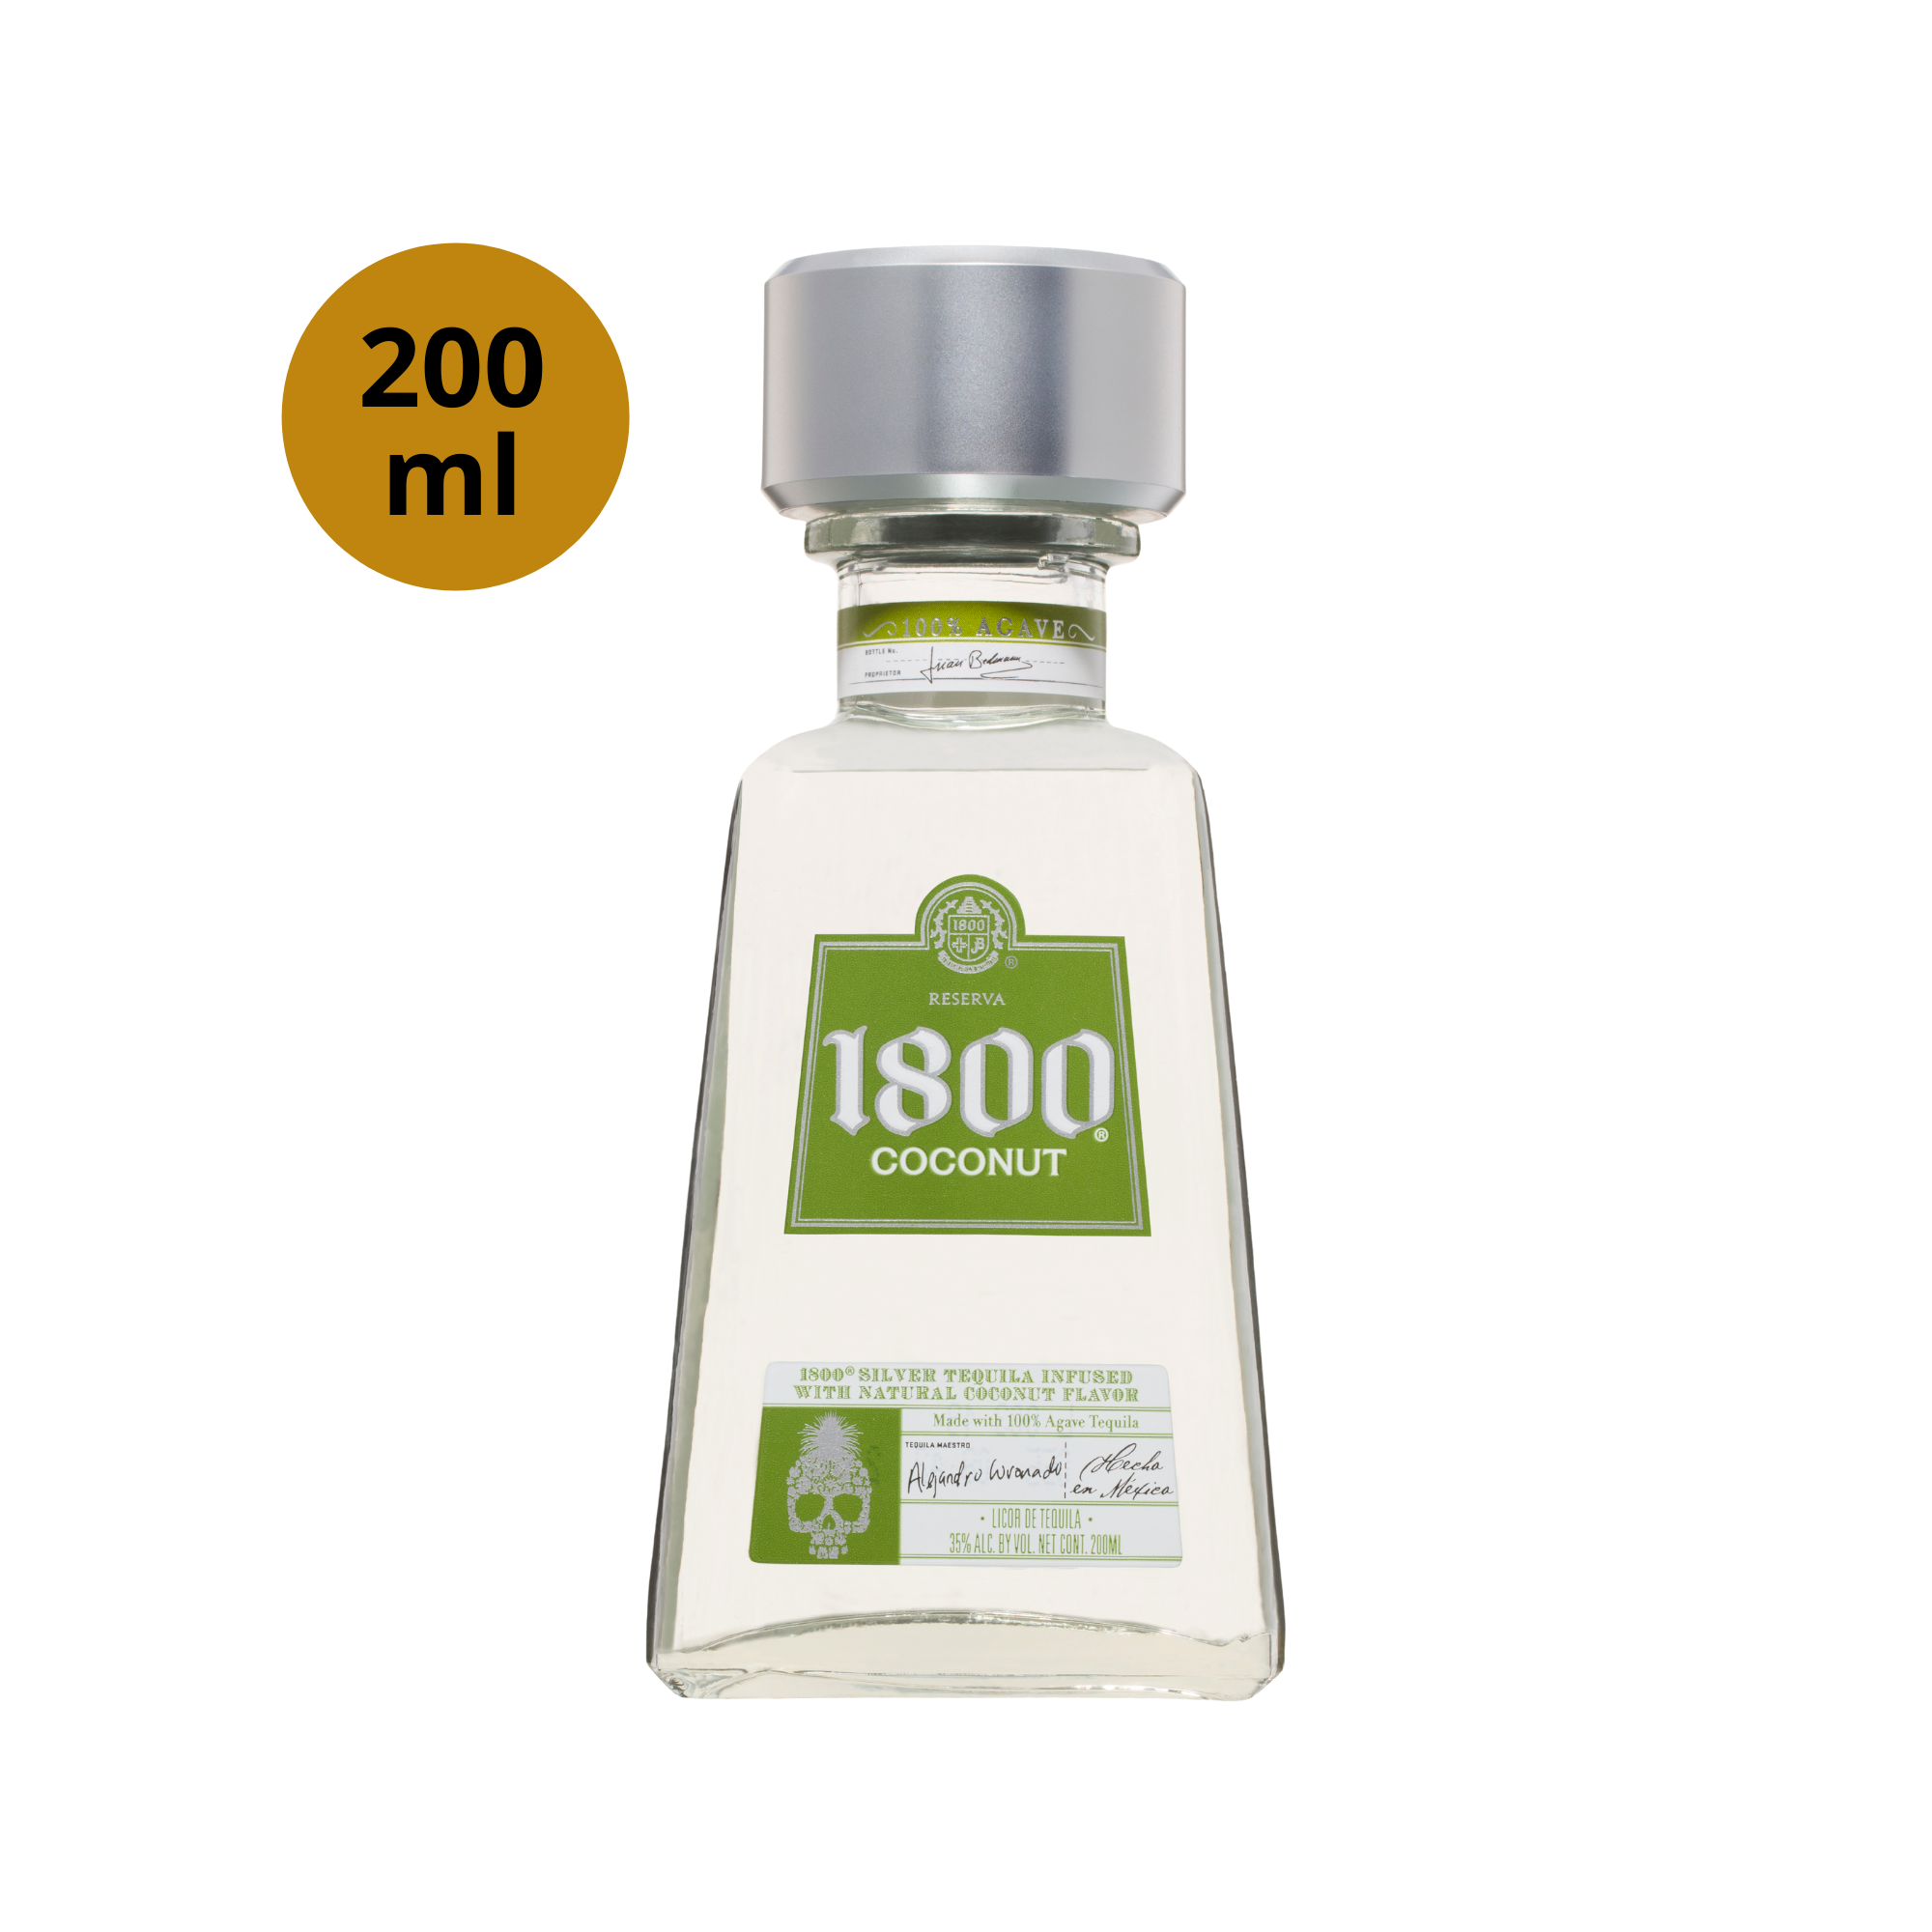 1800 Tequila Coconut 35% 0.2L